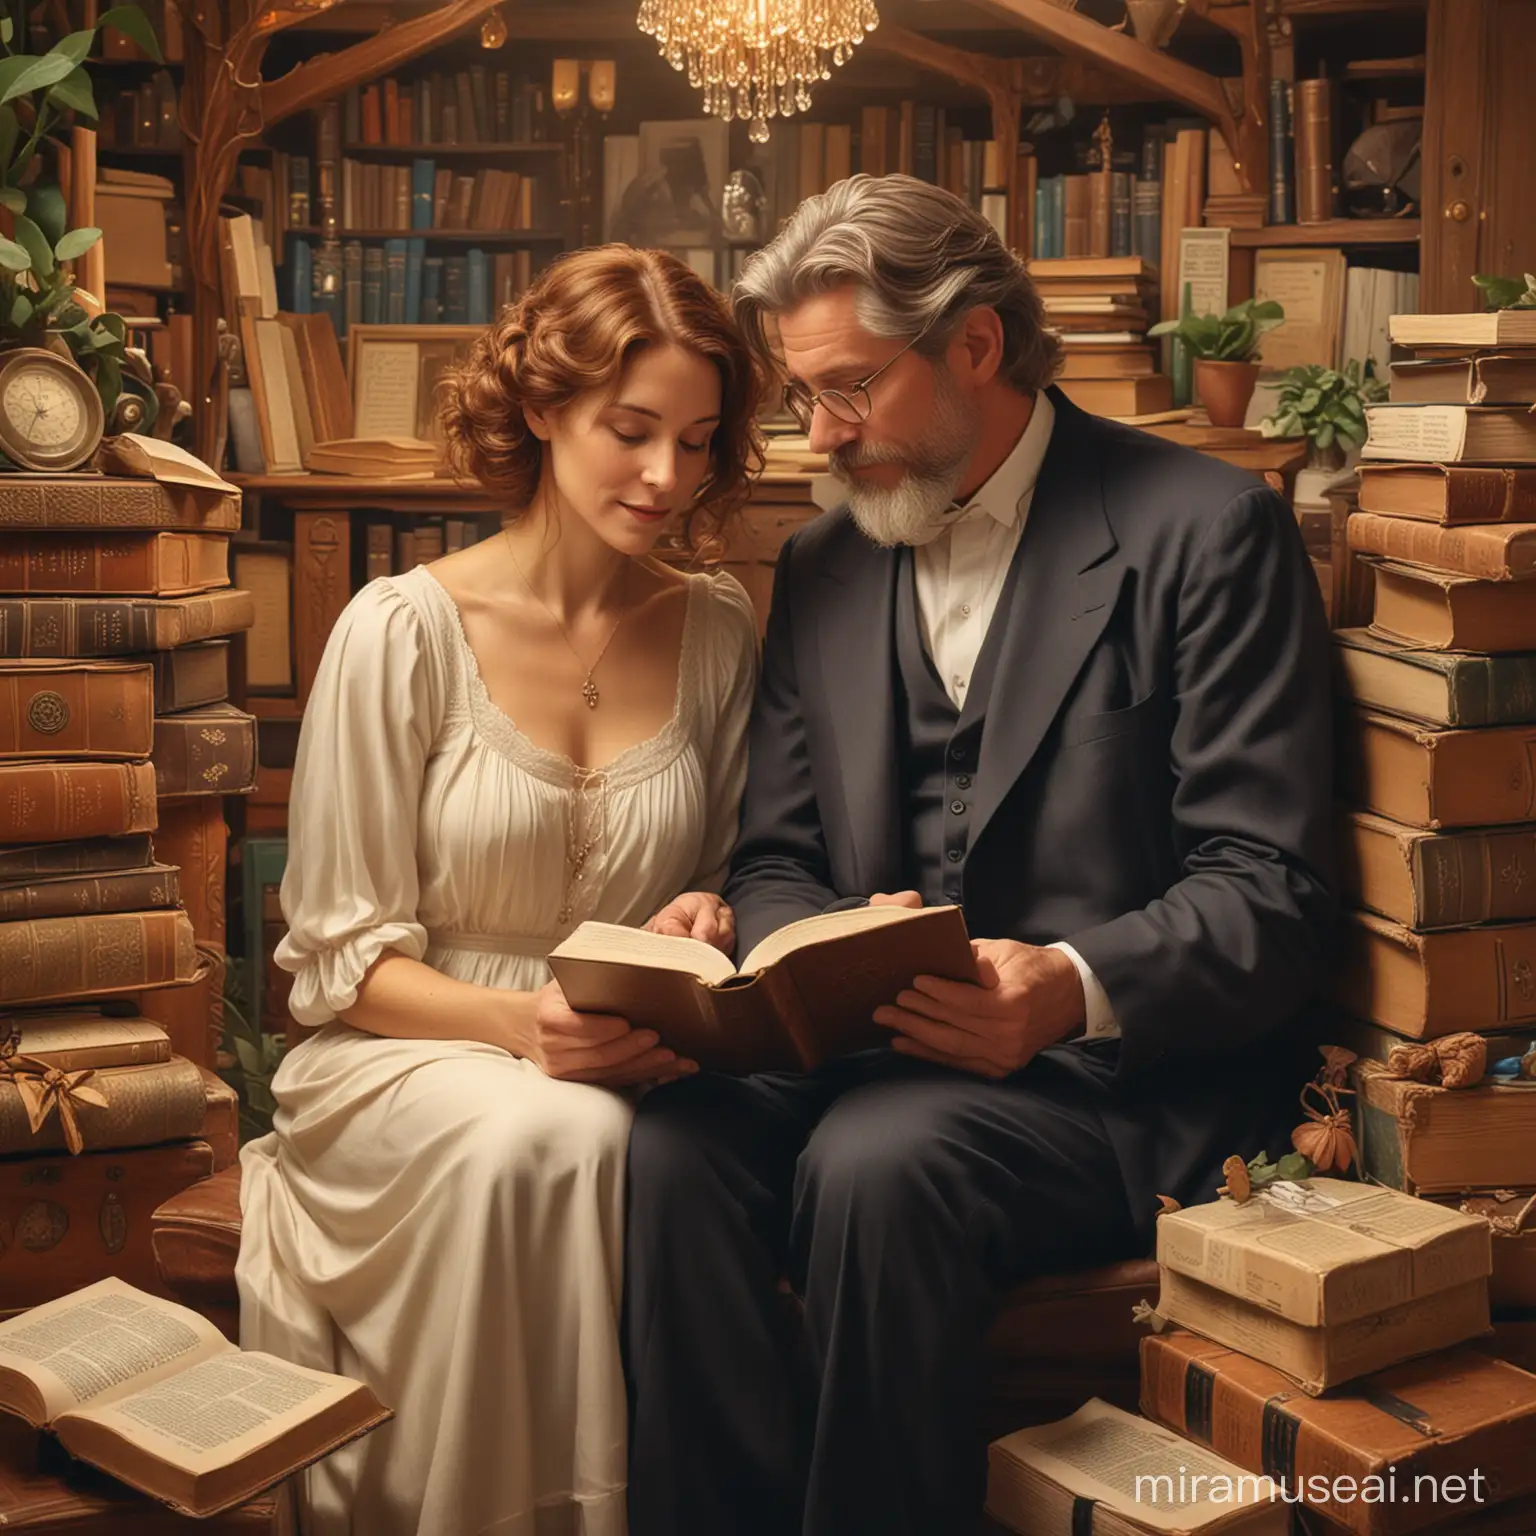 art nouveau style, beautiful middle aged couple, reading bible together, surrounded by boxes full of family heirlooms, finding faith, magical, hopeful 